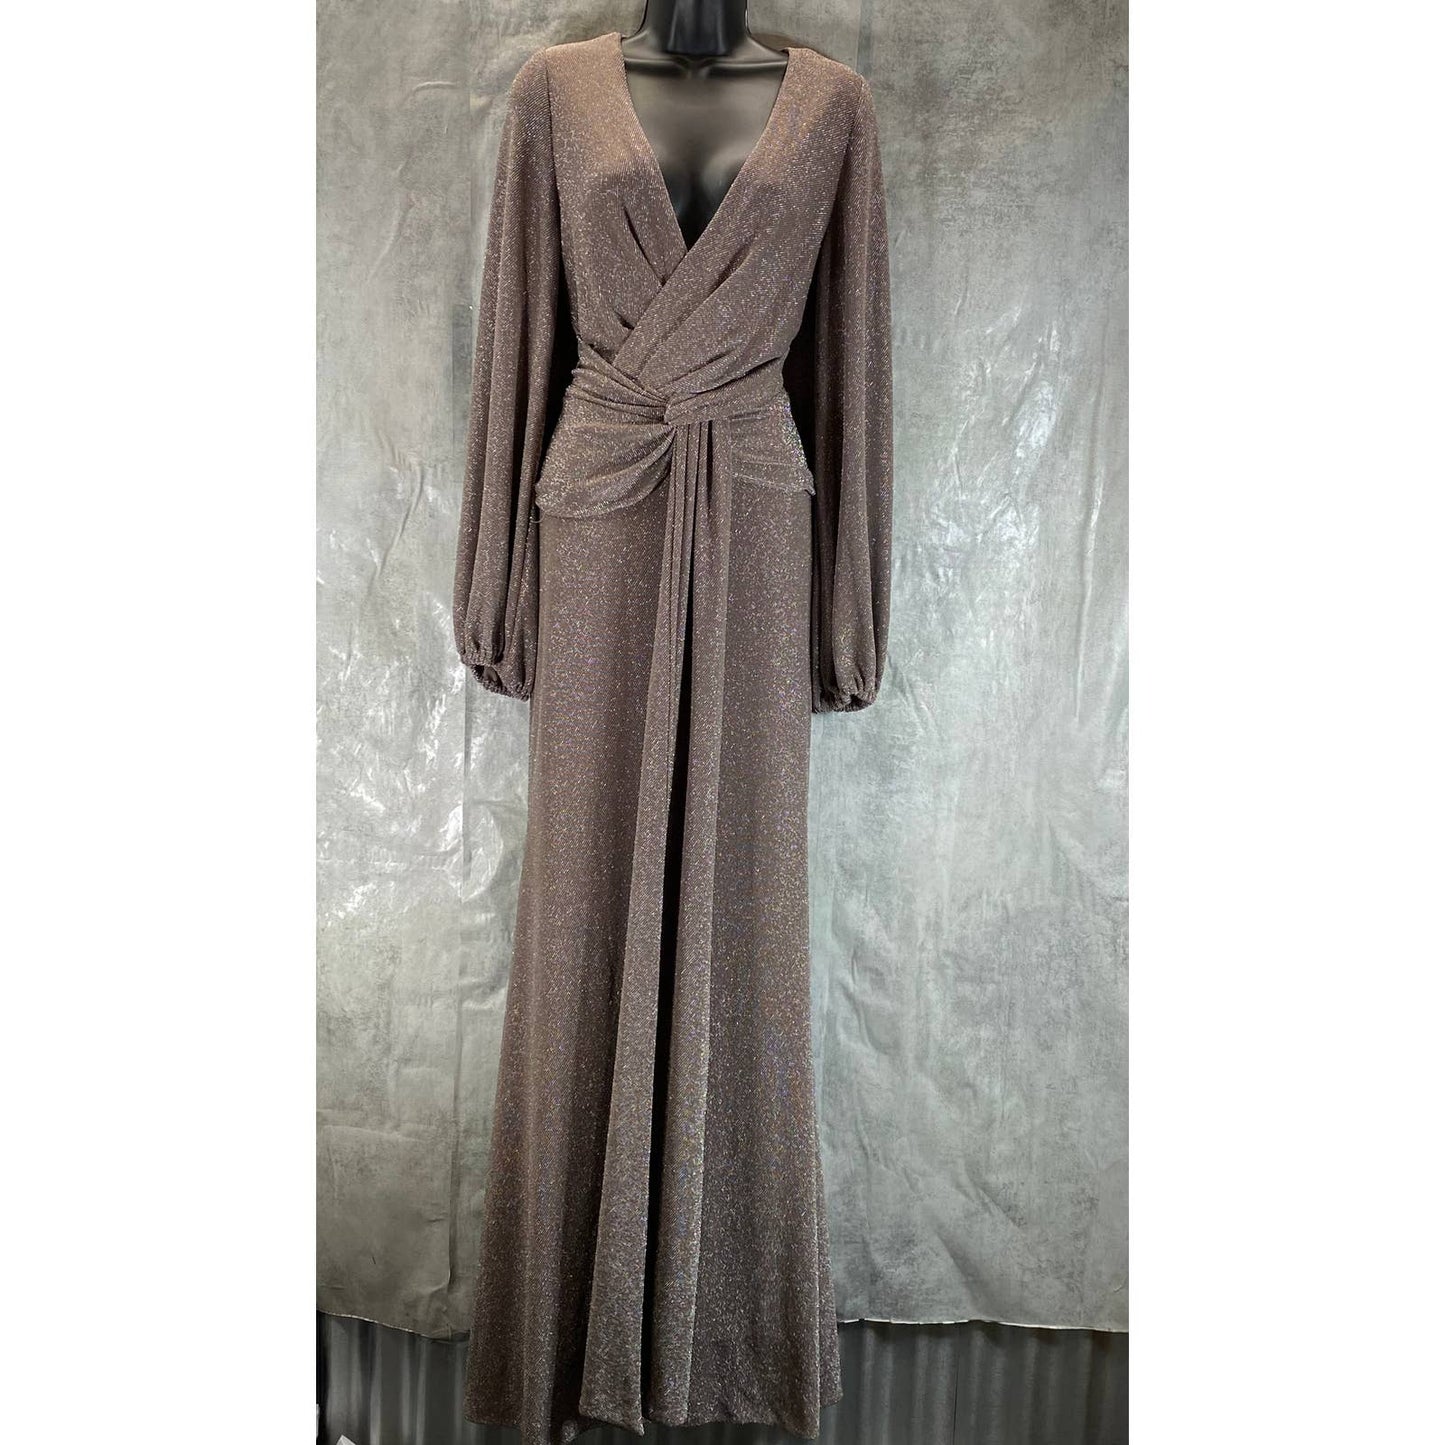 BETSY & ADAM Women's Taupe/Silver Metallic Long-Sleeve Knotted Gown SZ 10